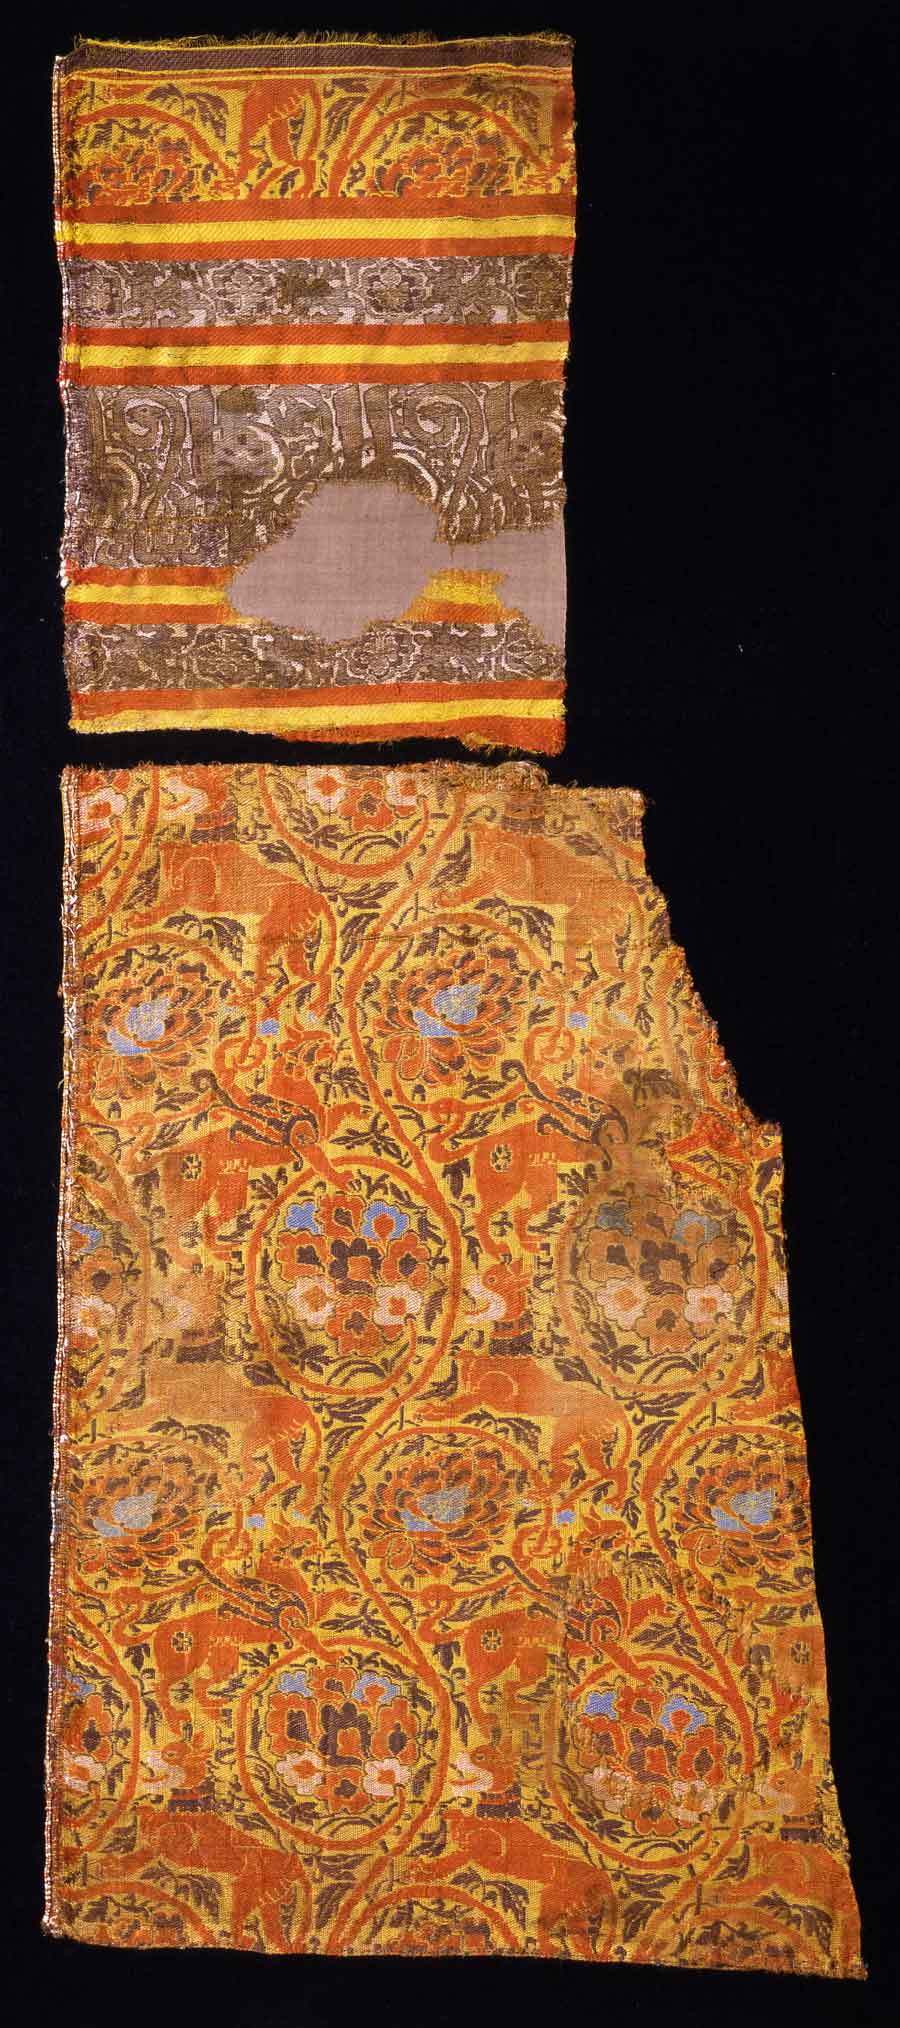 Silk textile with animals and mythical creatures in vine scrolls, Central Asia or Eastern Iran; 13th century <br> Textiles woven in or near Central Asia have shown the influence of both East and West since ancient times, and this is also true of this vibrant silk. The inscription frieze at the top is based on Arabic, and both the griffins and the lions have a clear Western look. The lively arabesque-like swirling vines in two layers (one red, the other brown) point in both directions, while the heavy, colorful flowerheads are clearly inspired by the Chinese lotus and peony. The frieze is a good example of how calligraphy and vegetal ornamentation were merged into an artistic whole. In contrast to the somewhat older bowls, where letters develop into plants, these end in animal heads of different types.